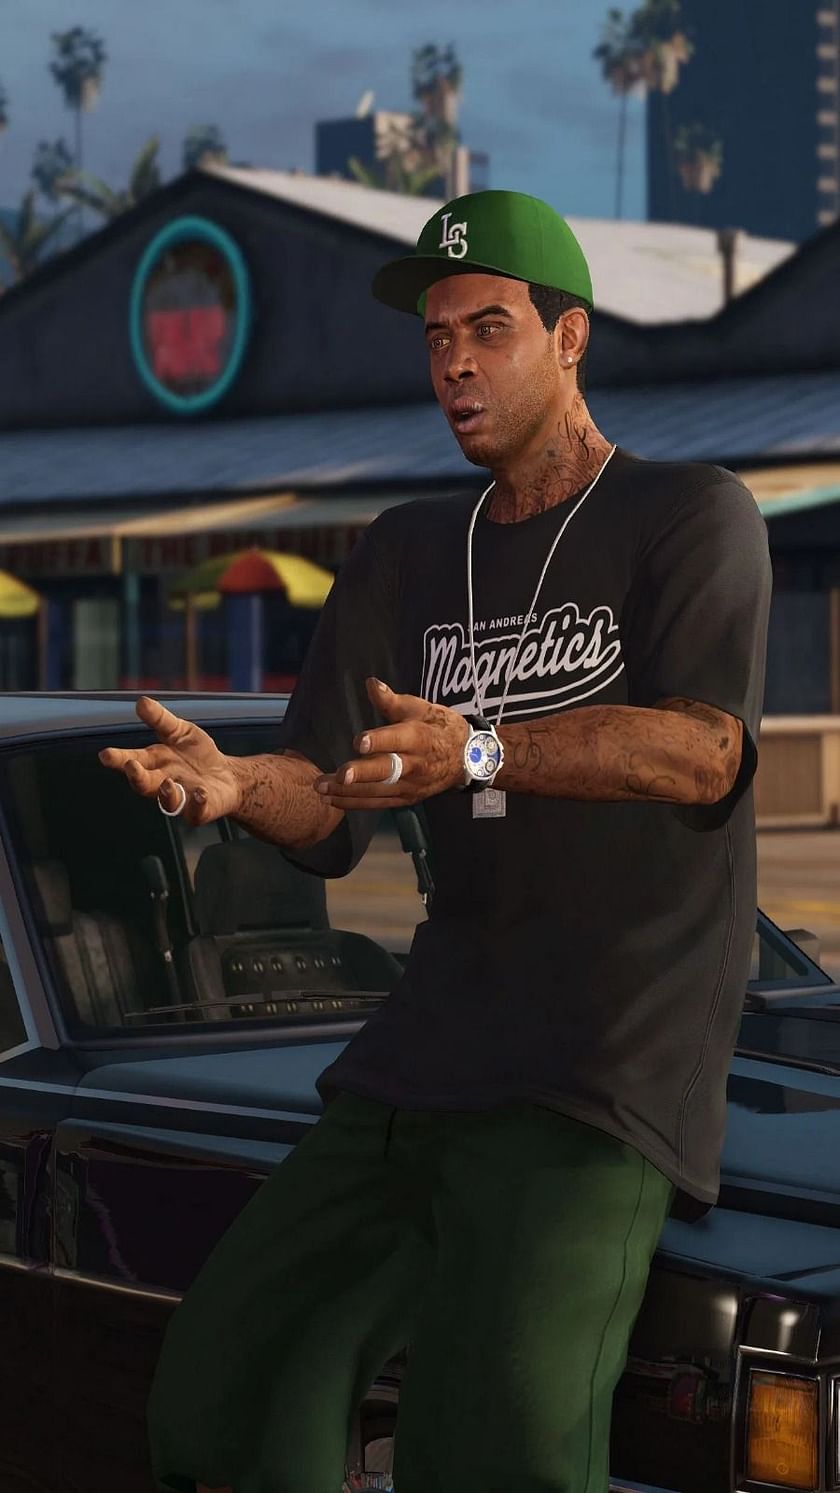 Top 5 glaring issues with GTA Online in 2021